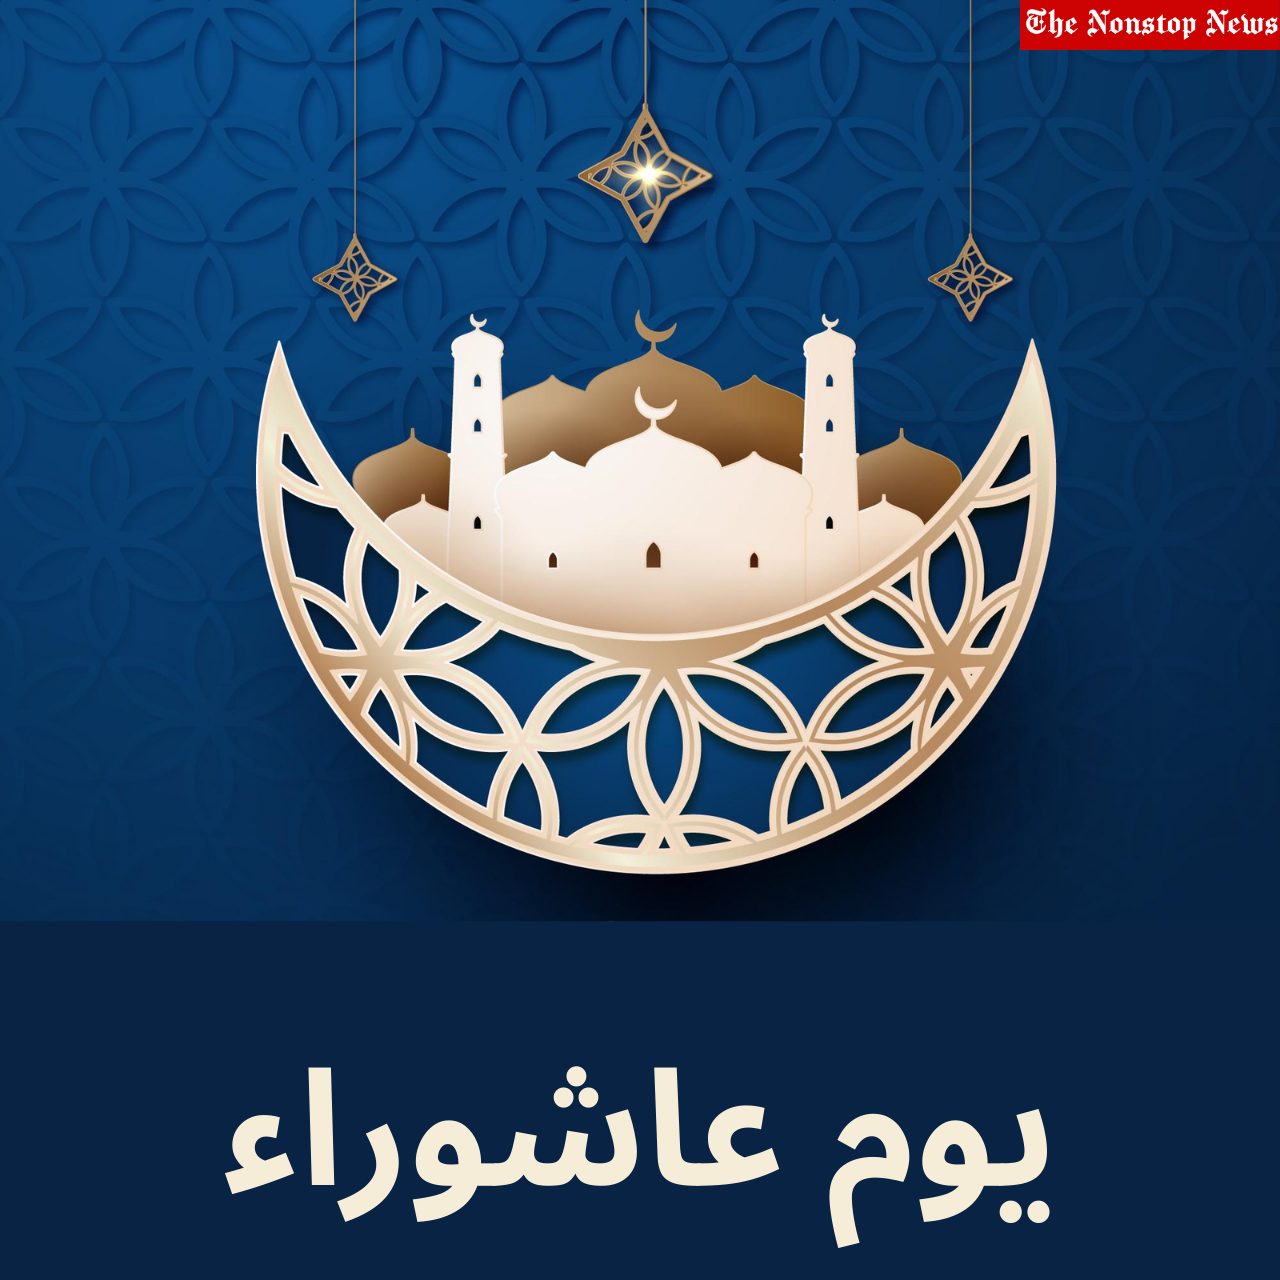 Ashura Day 2021 Arabic Greetings, Quotes, Messages, HD Images, and Wishes to share on the 10th Day of Muharram